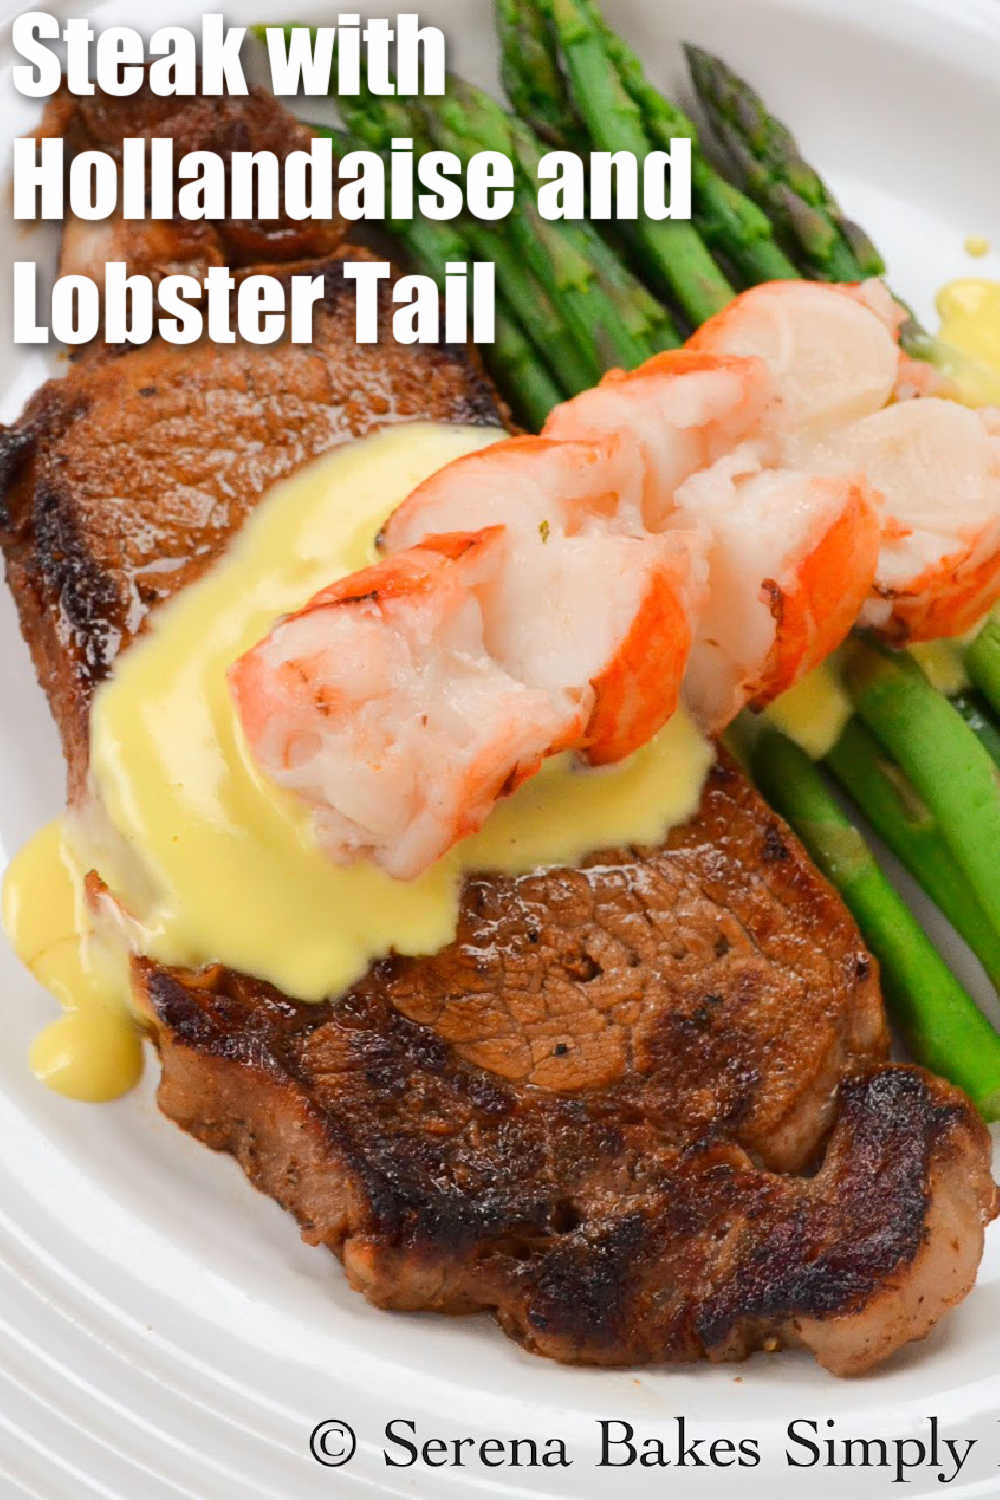 Pan Seared Steak with Hollandaise Sauce and Lobster Tail